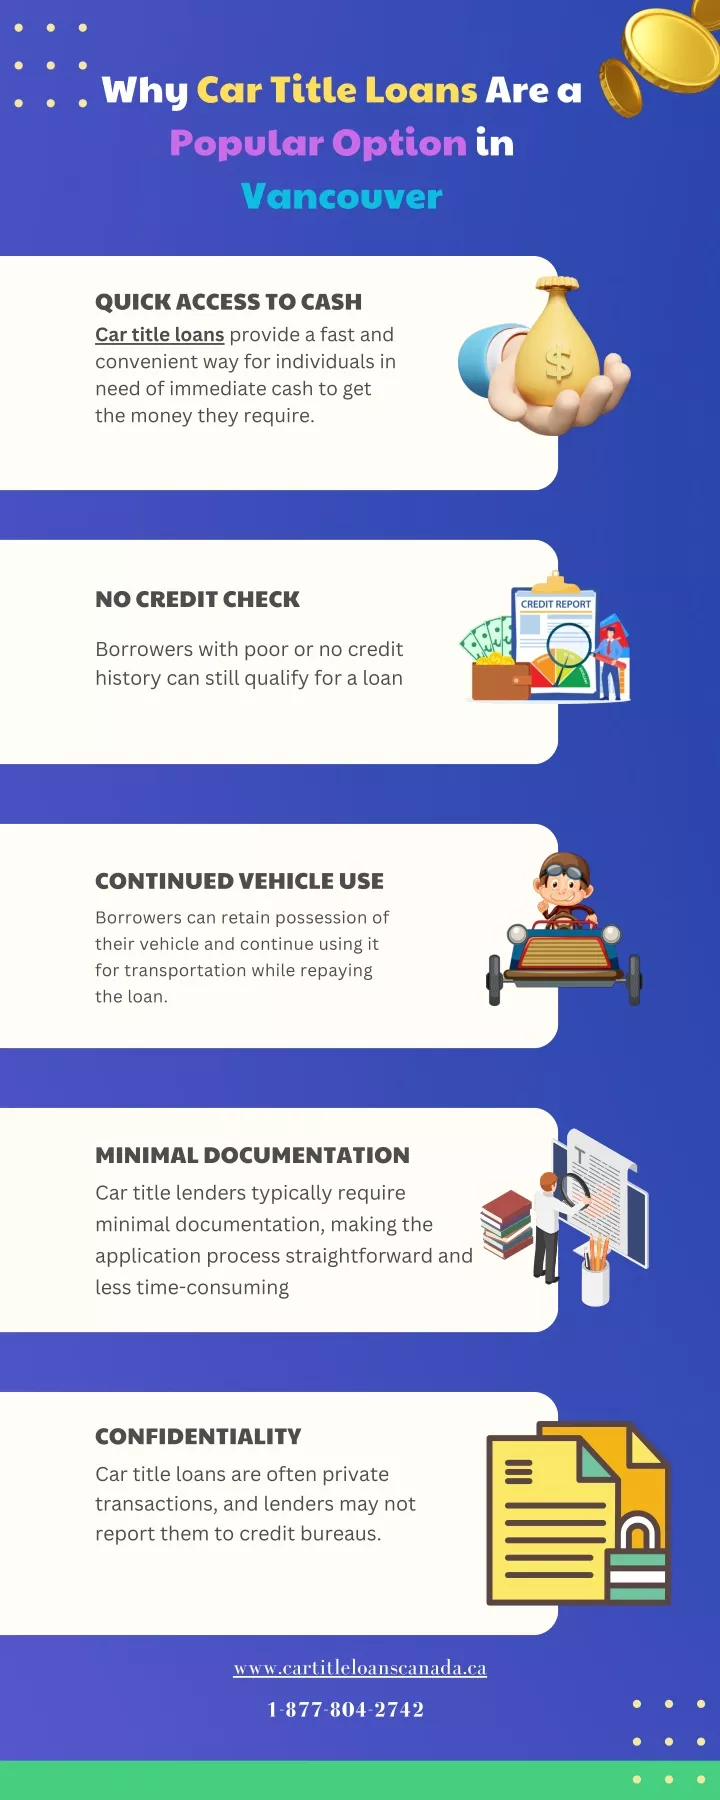 why car title loans are a popular option